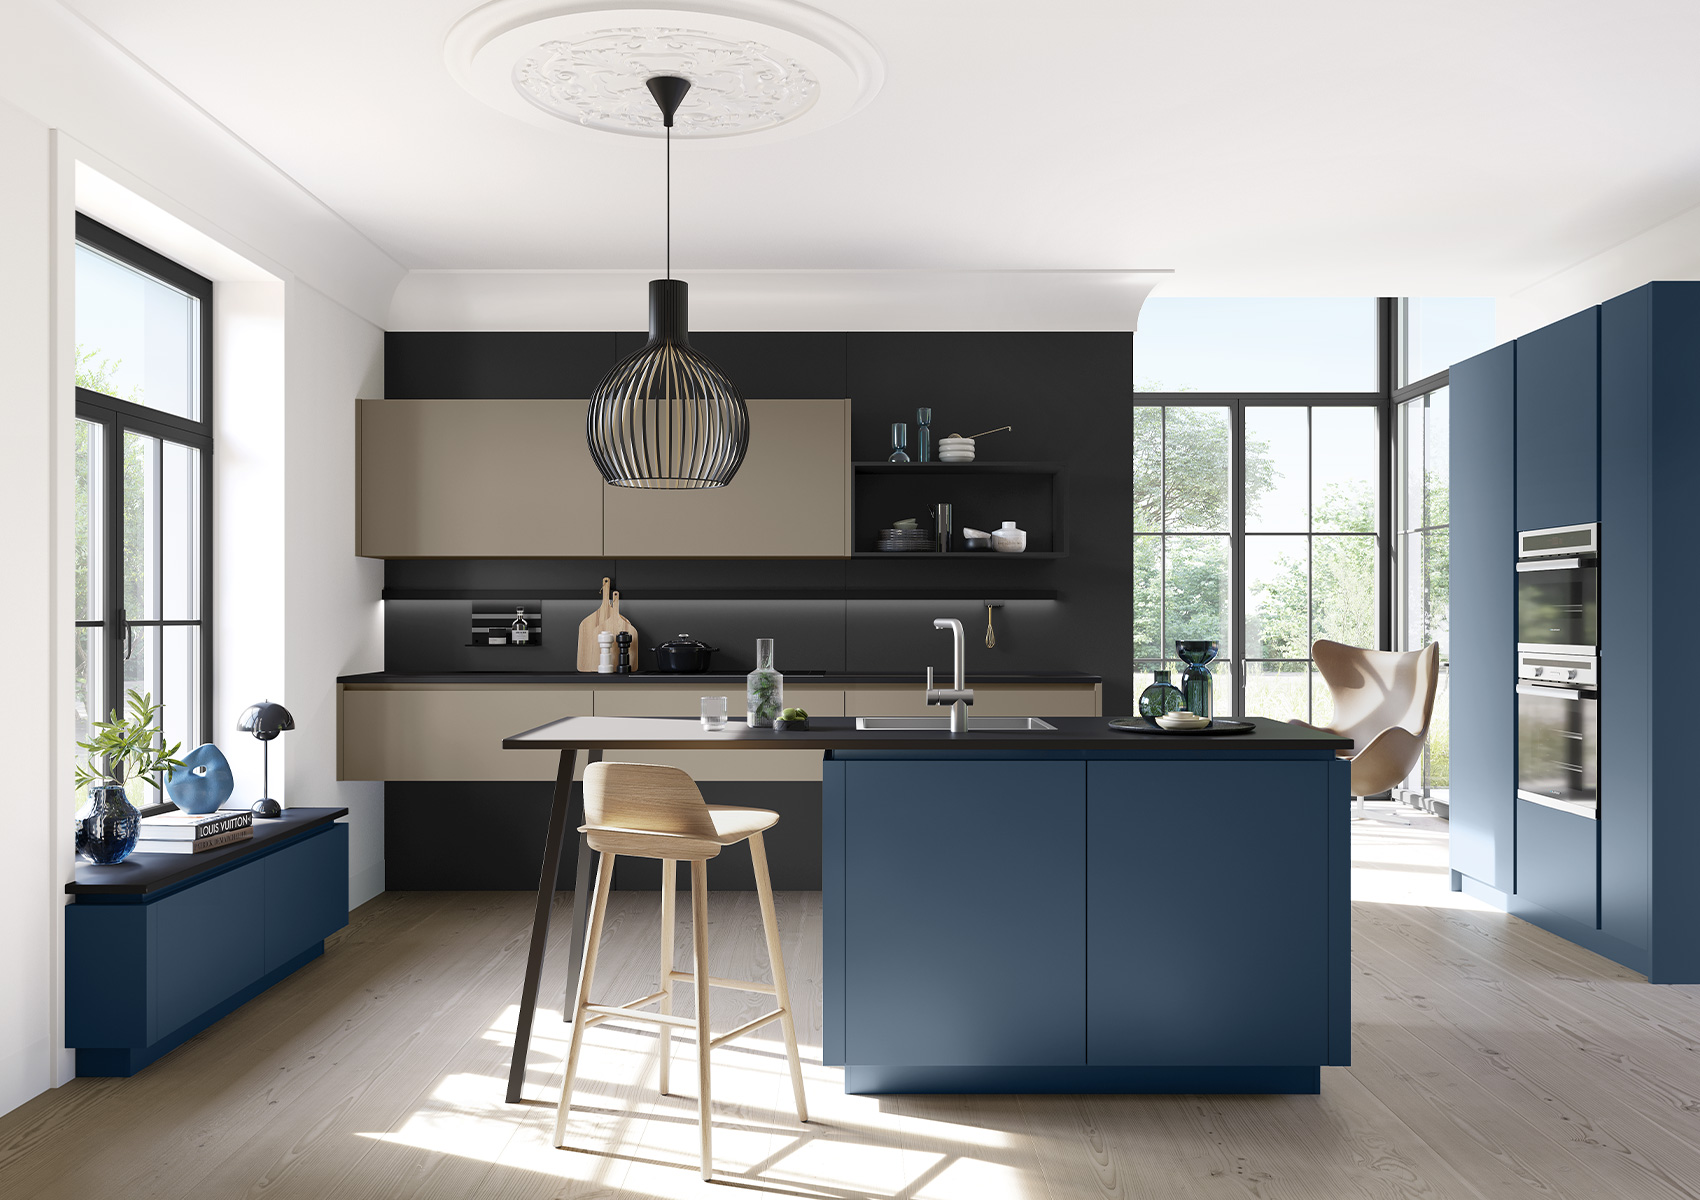 PORTO-GL Selection Ocean and Umbra-nature, frontal view of the kitchen, with window unit, kitchen island and tall unit